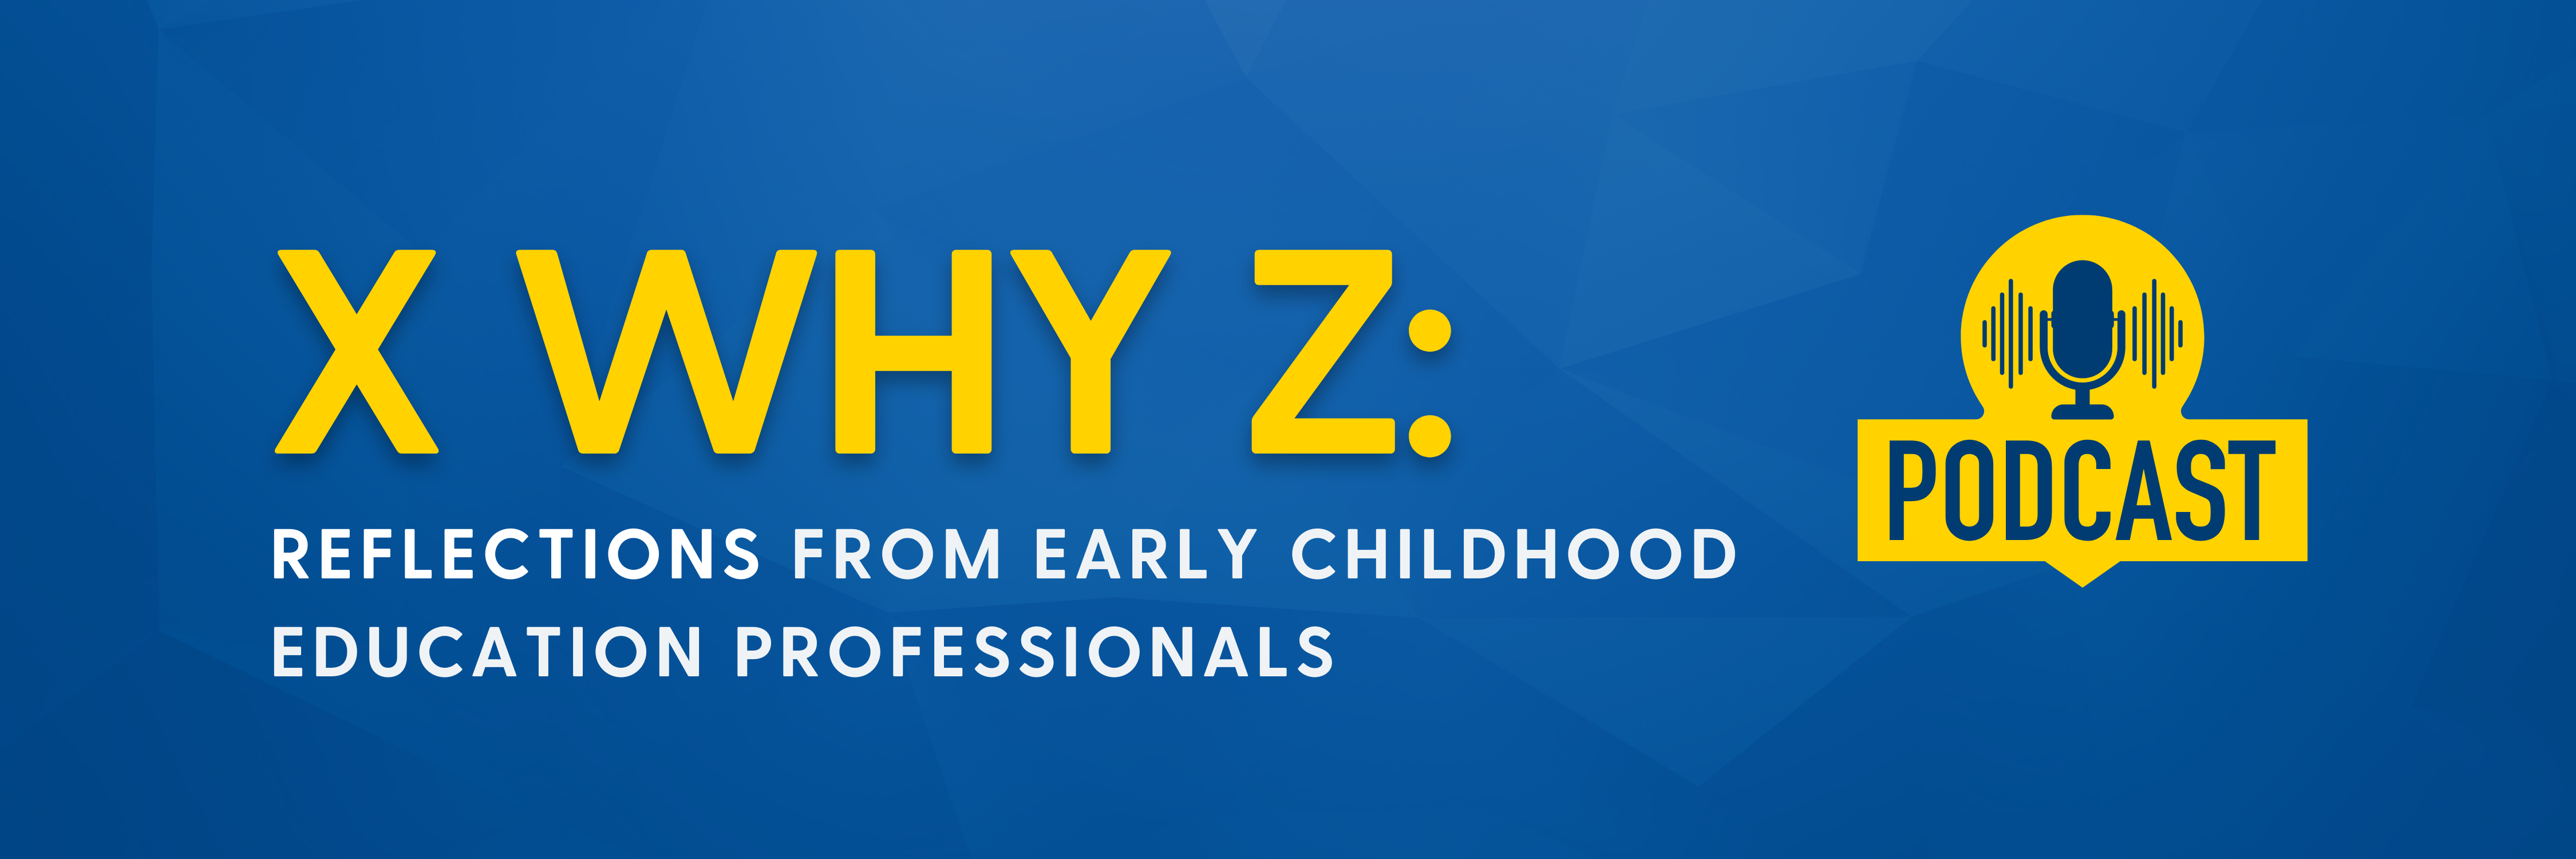 X, WHY, Z: REFLECTIONS FROM EARLY CHILDHOOD EDUCATION PROFESSIONALS